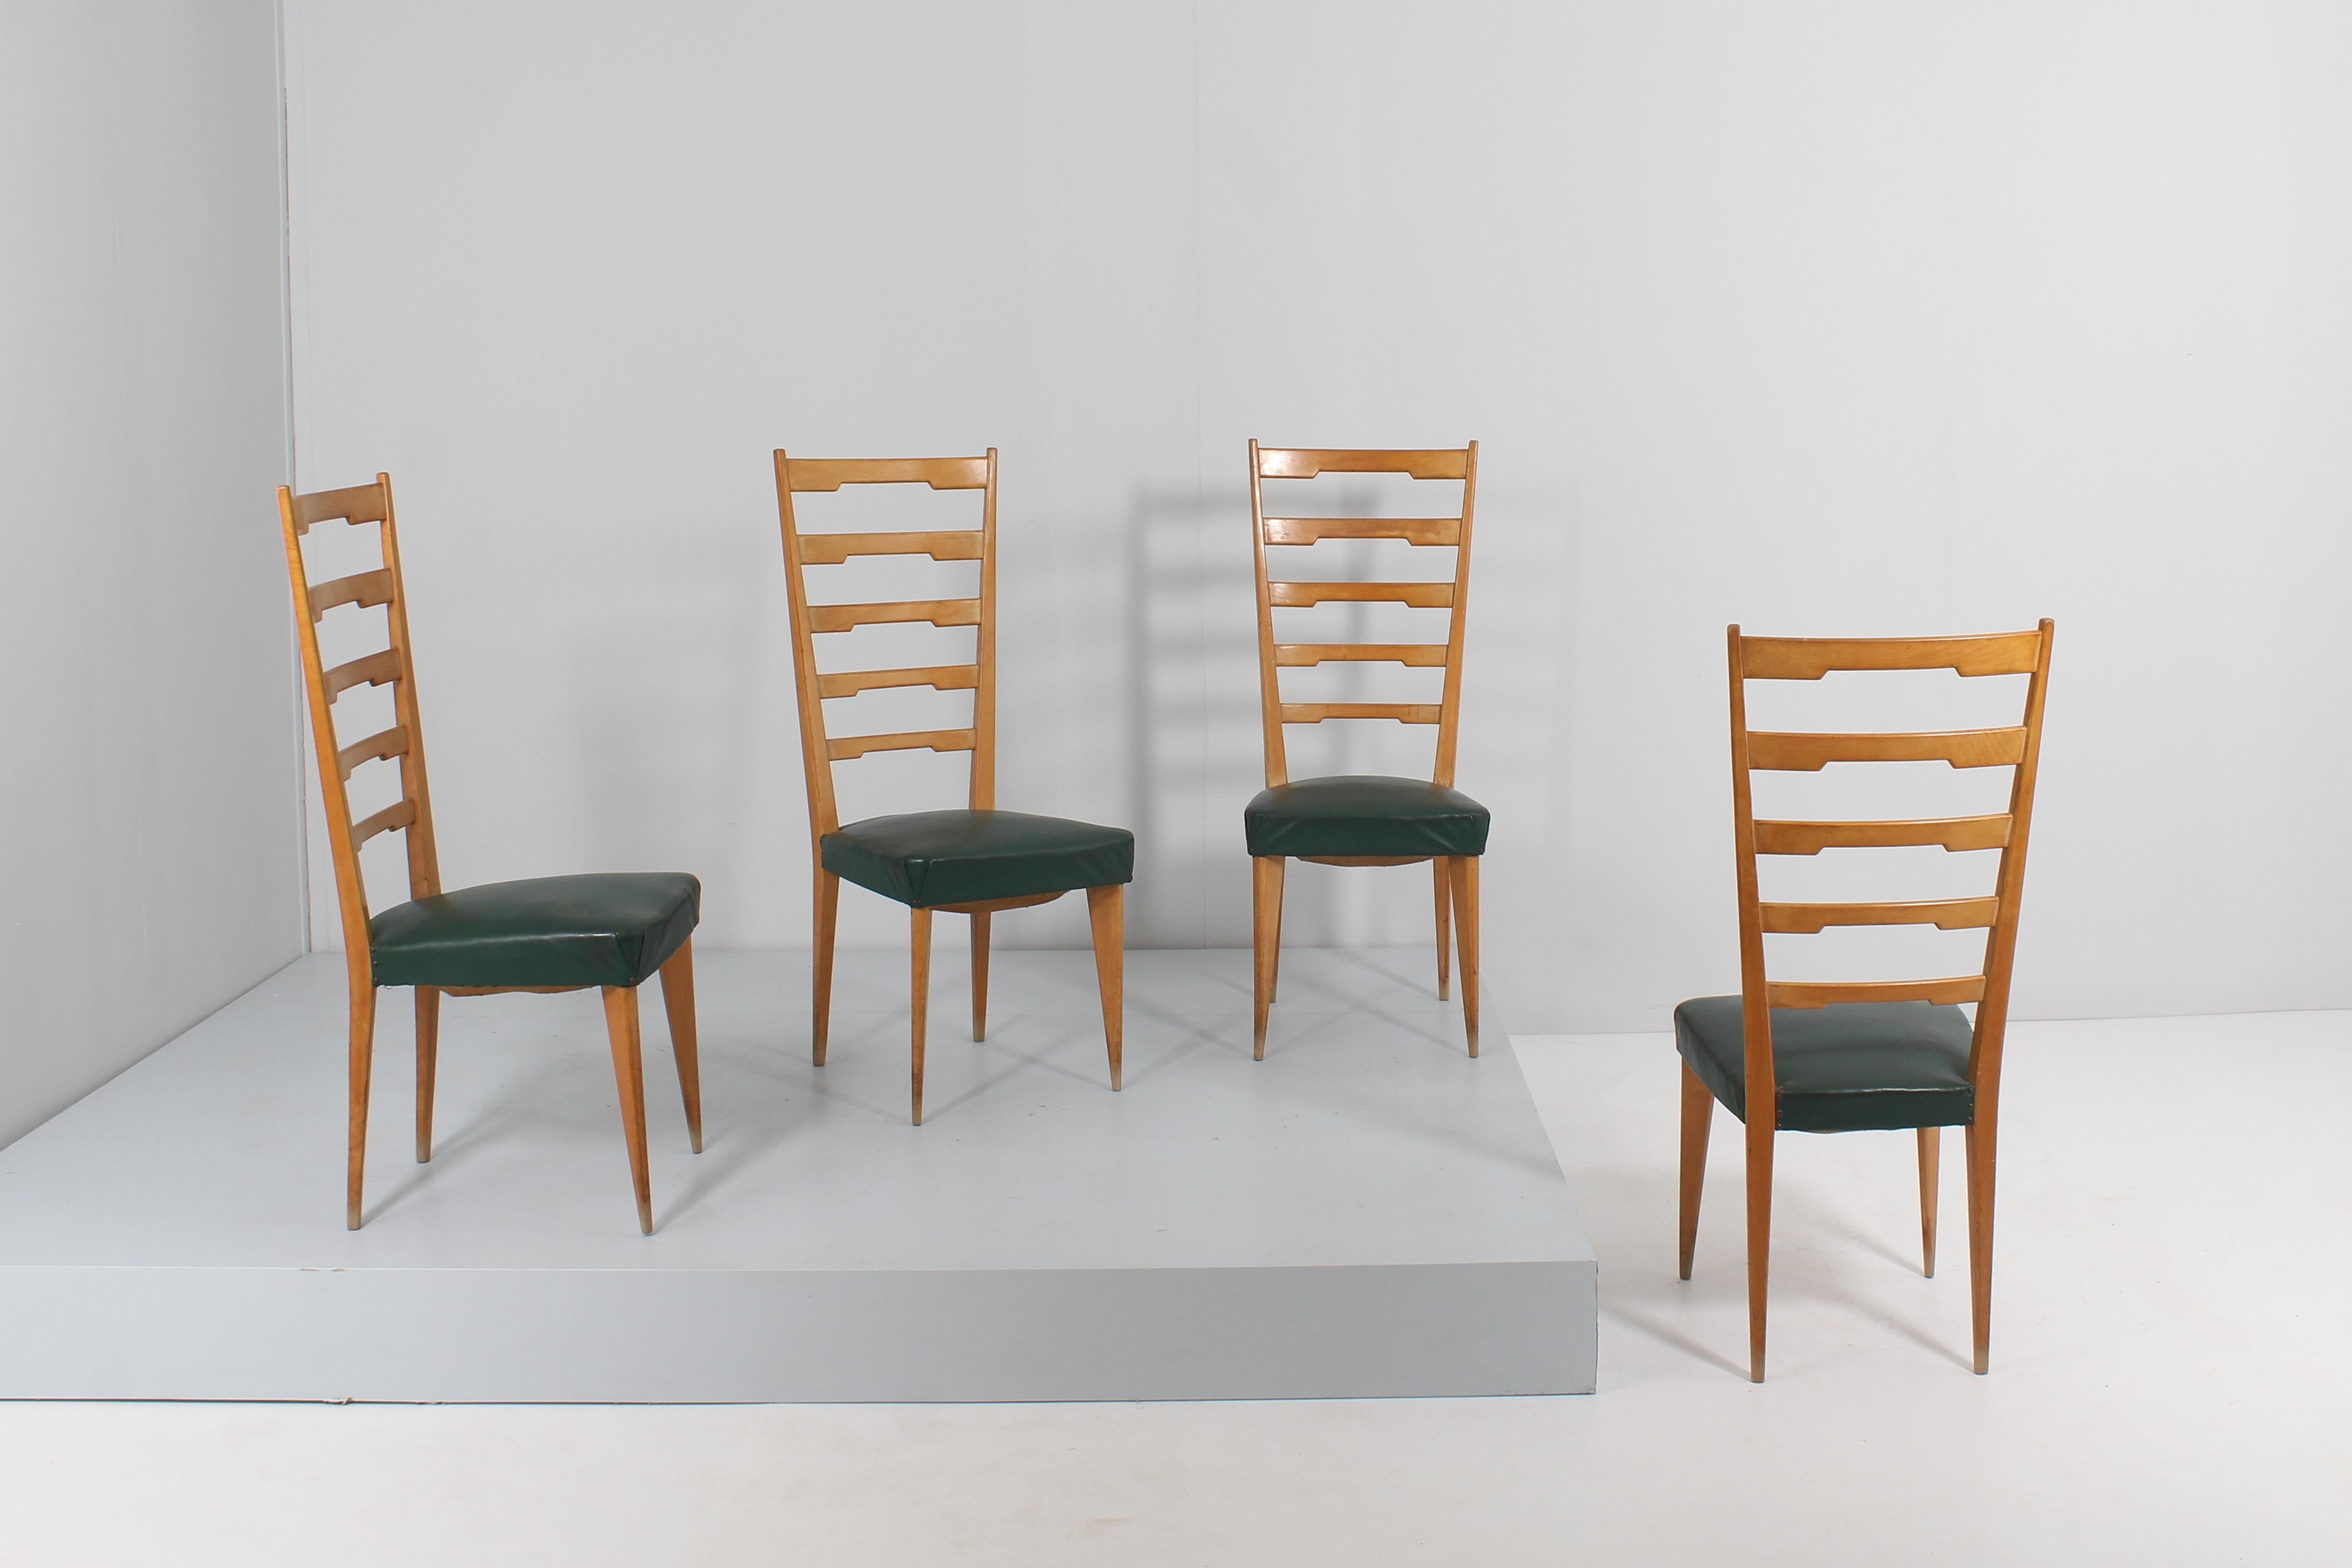 Beautiful and elegant set of 4 chairs, in light wood, high back with shaped horizontal elements and spiked legs. The seat is lined in dark green synthetic skai. Italian production from the 60s in the style of Paolo Buffa.
Wear consistent with age